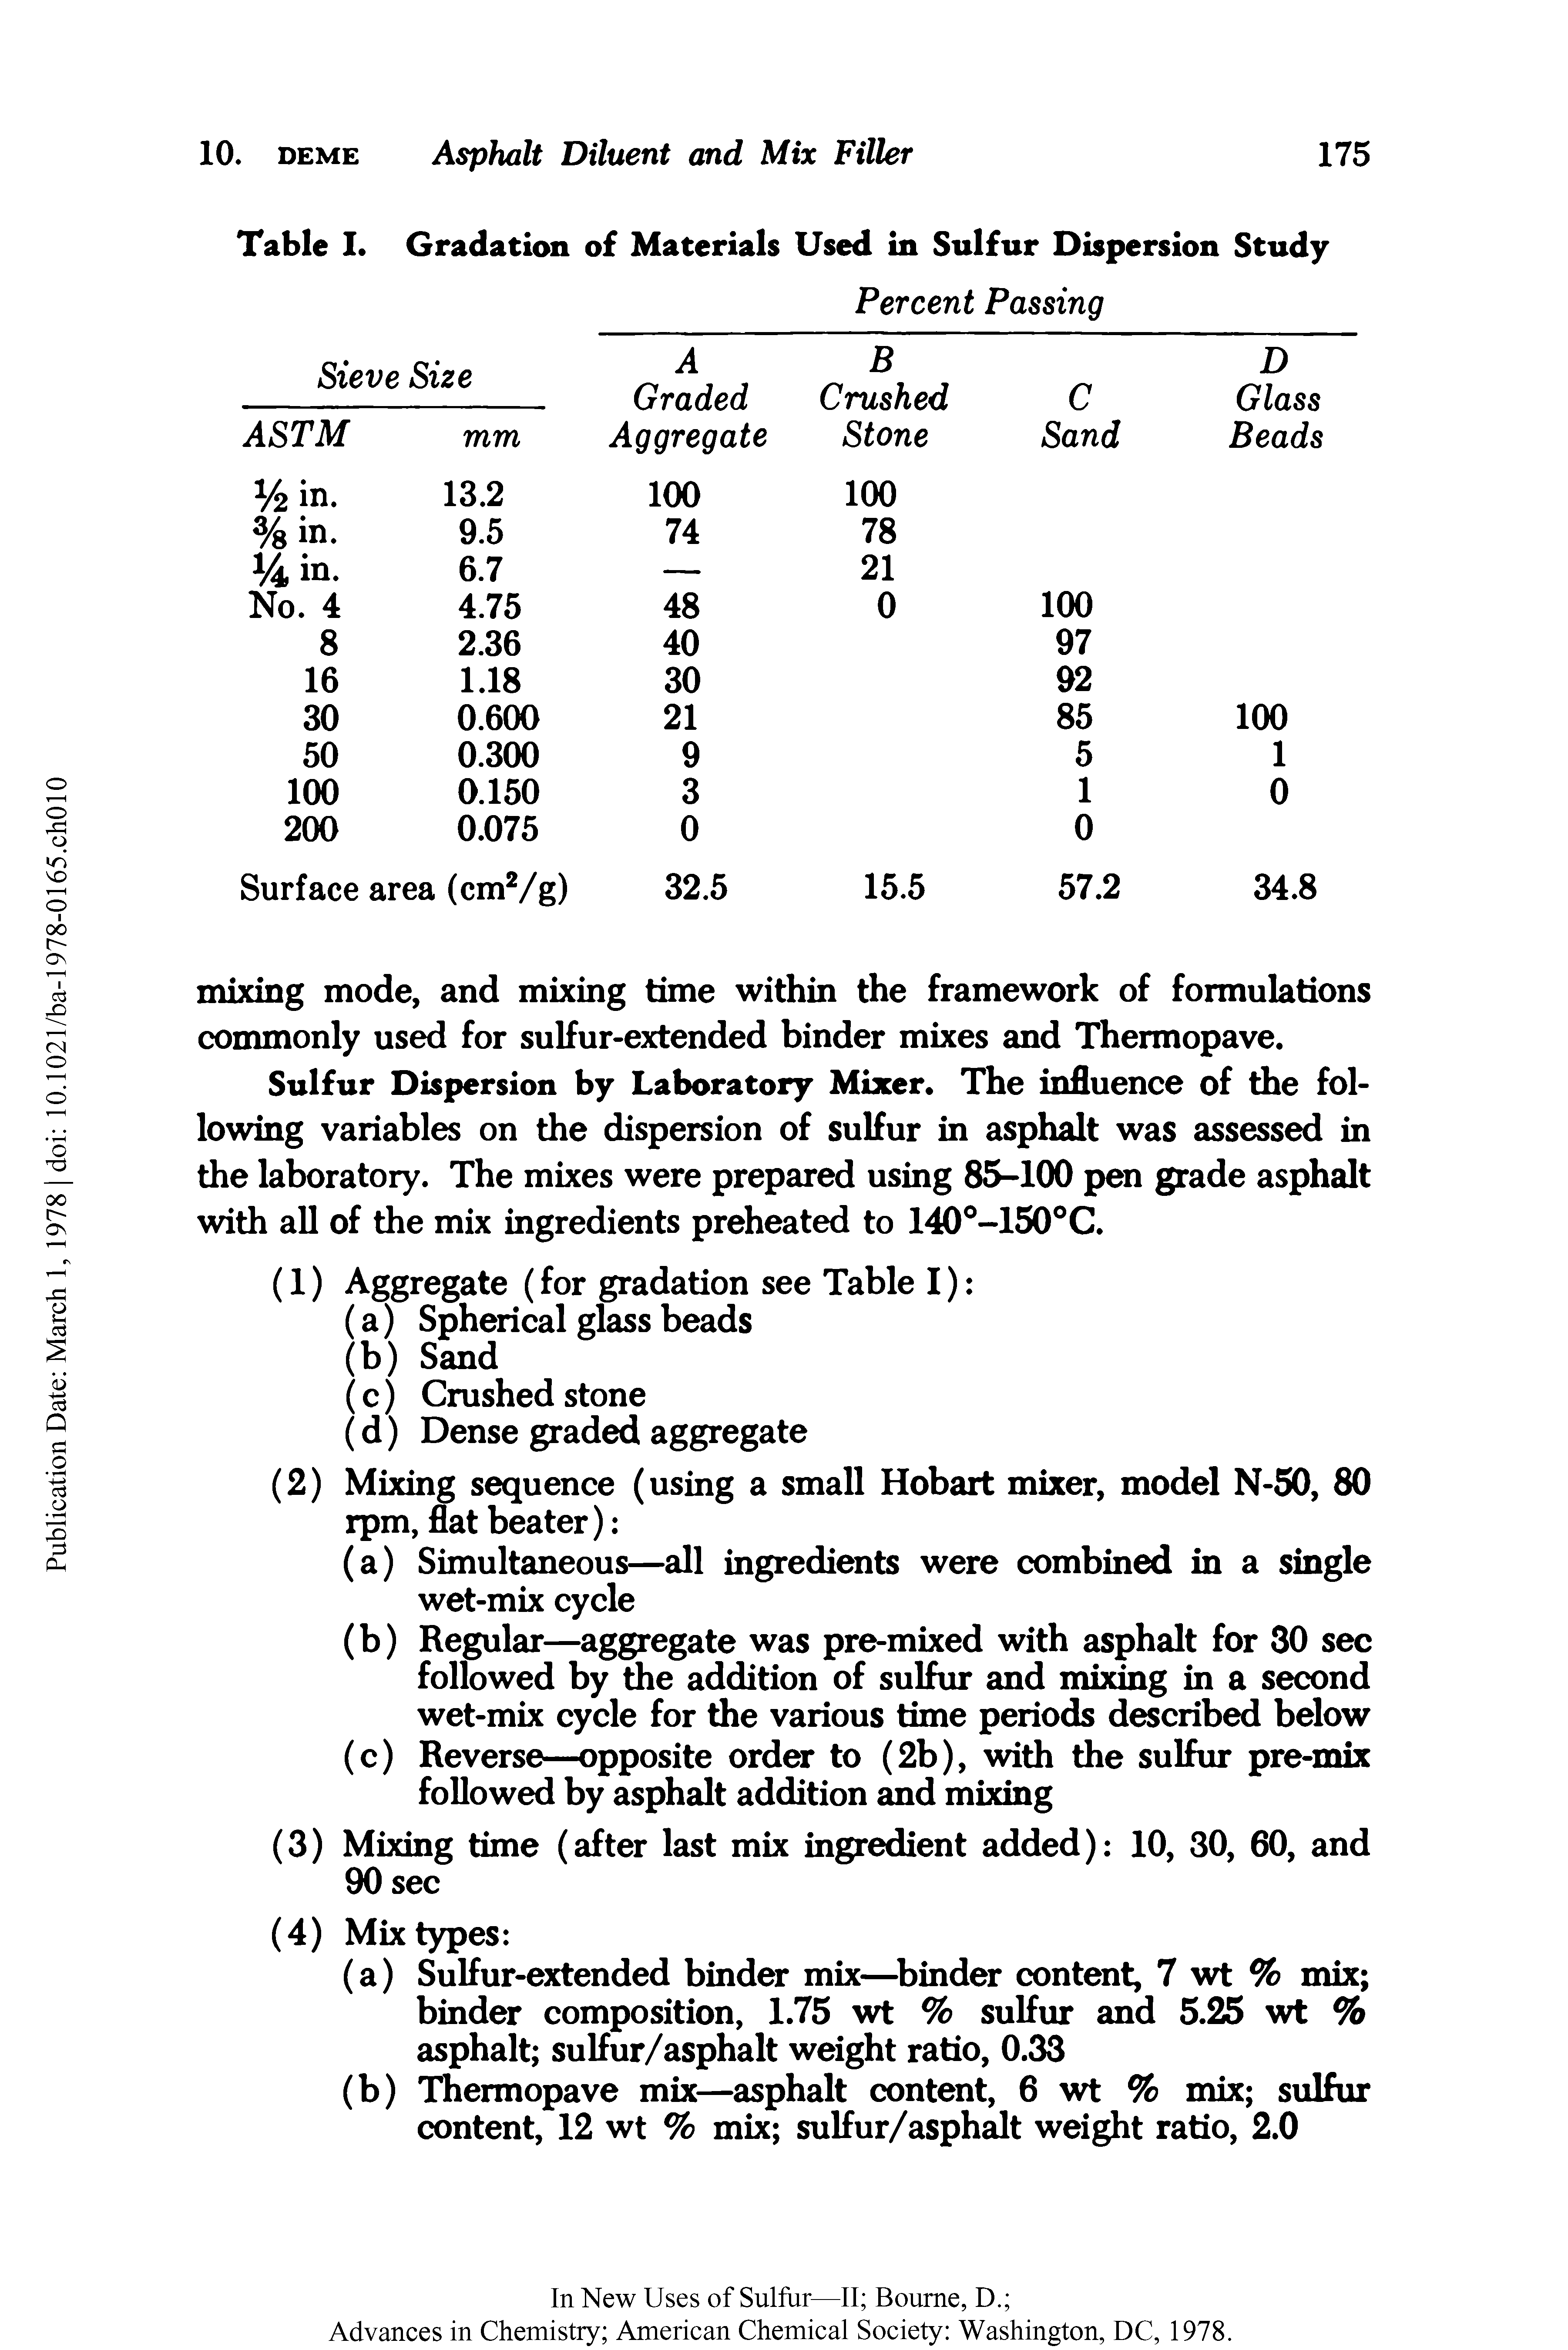 Table I. Gradation of Materials Used in Sulfur Dispersion Study...